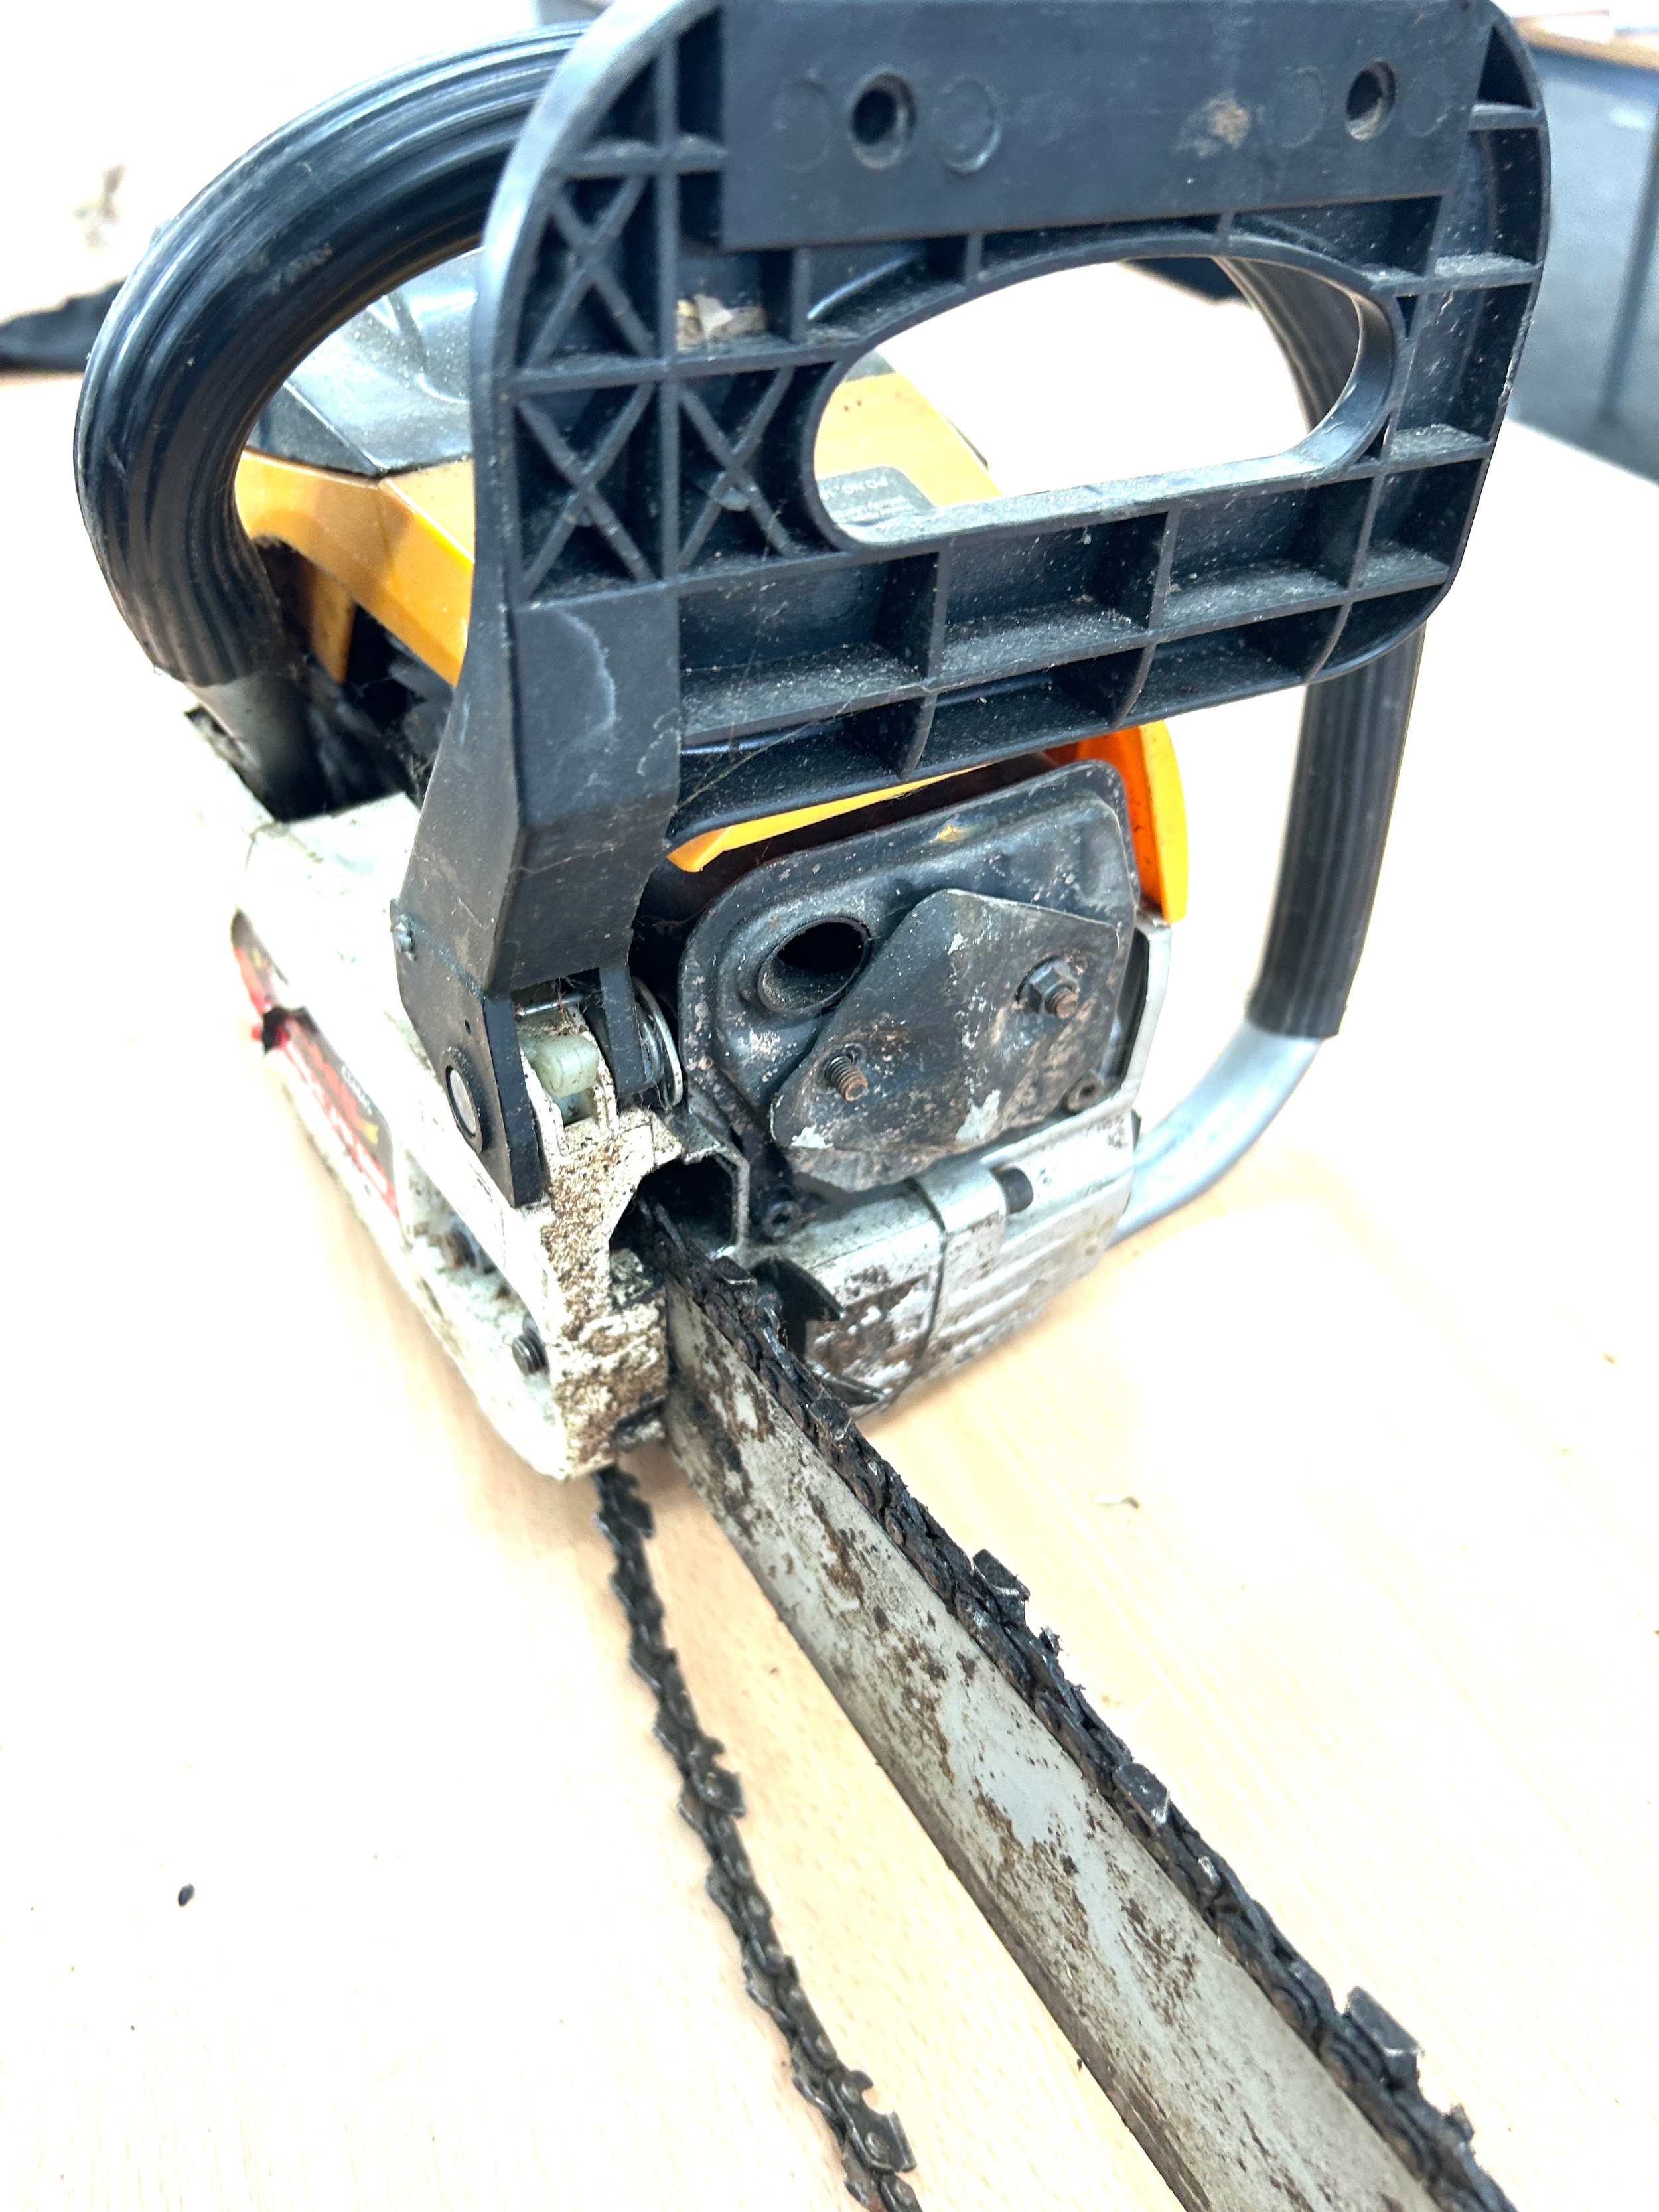 Nilsen CT4845 chain saw - untested - Image 4 of 4